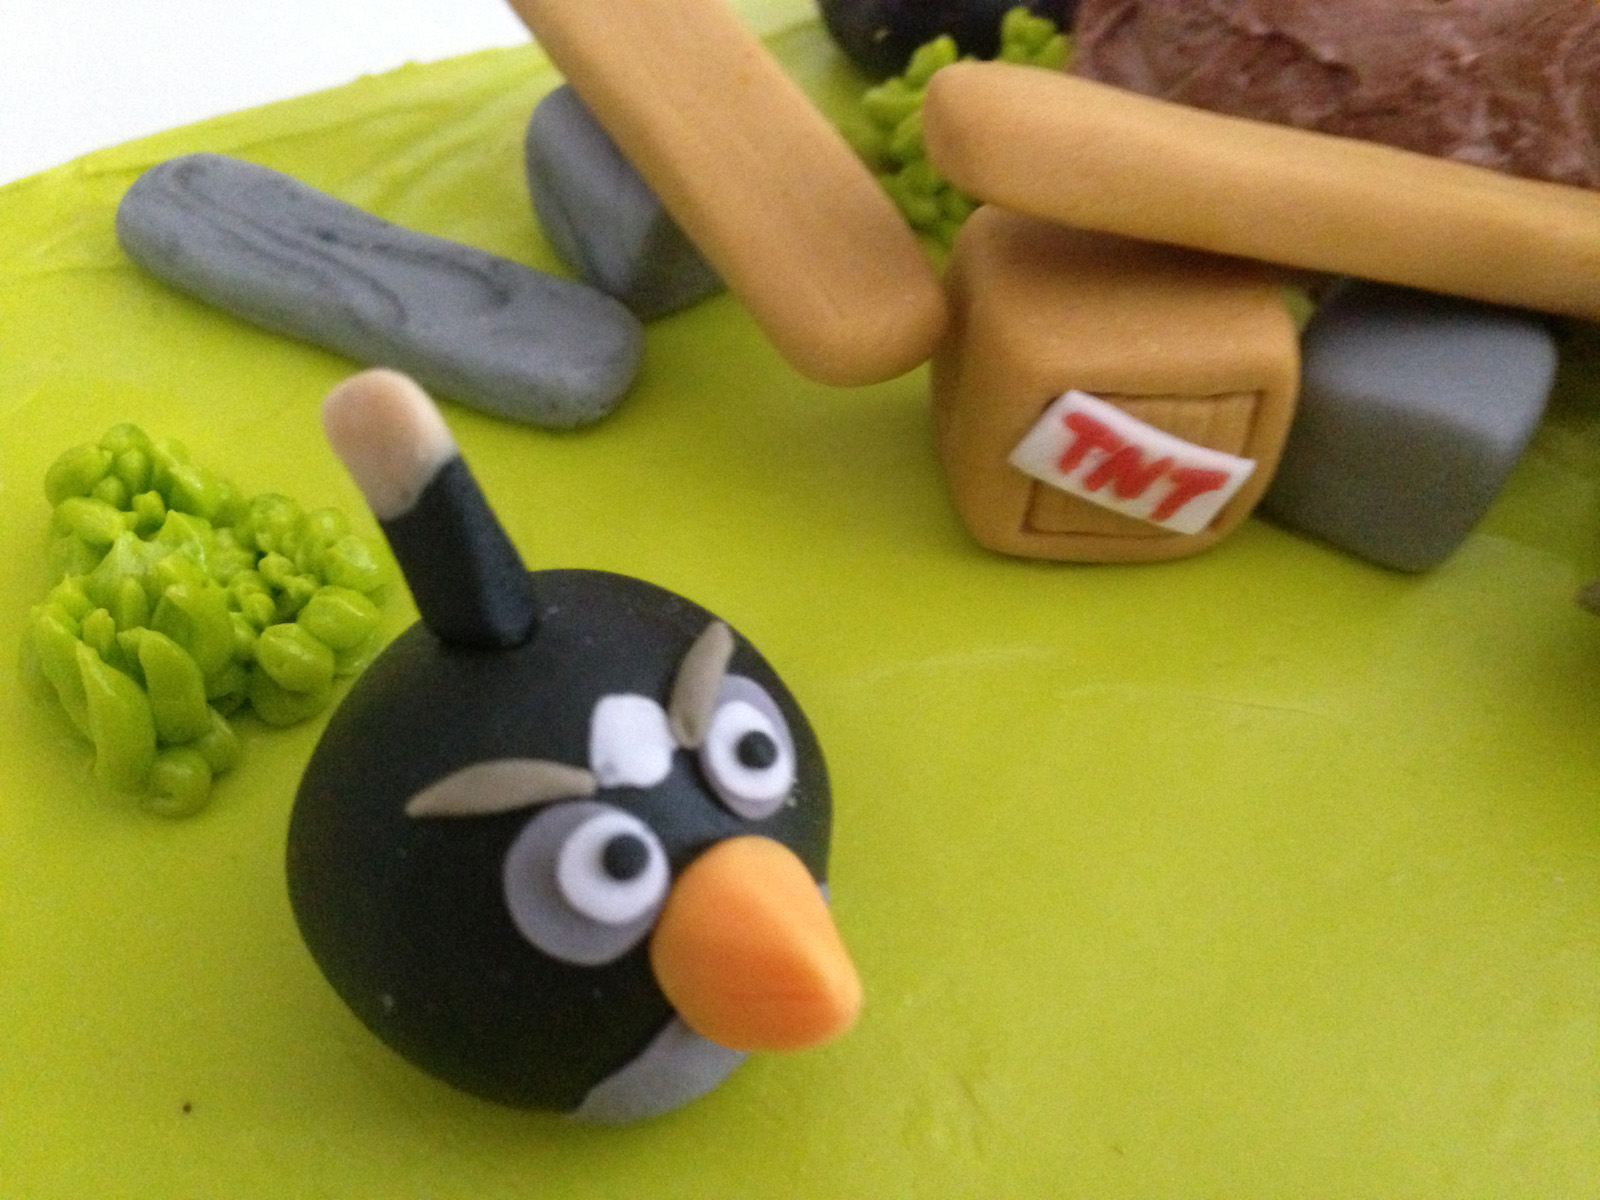 angry-birds-4